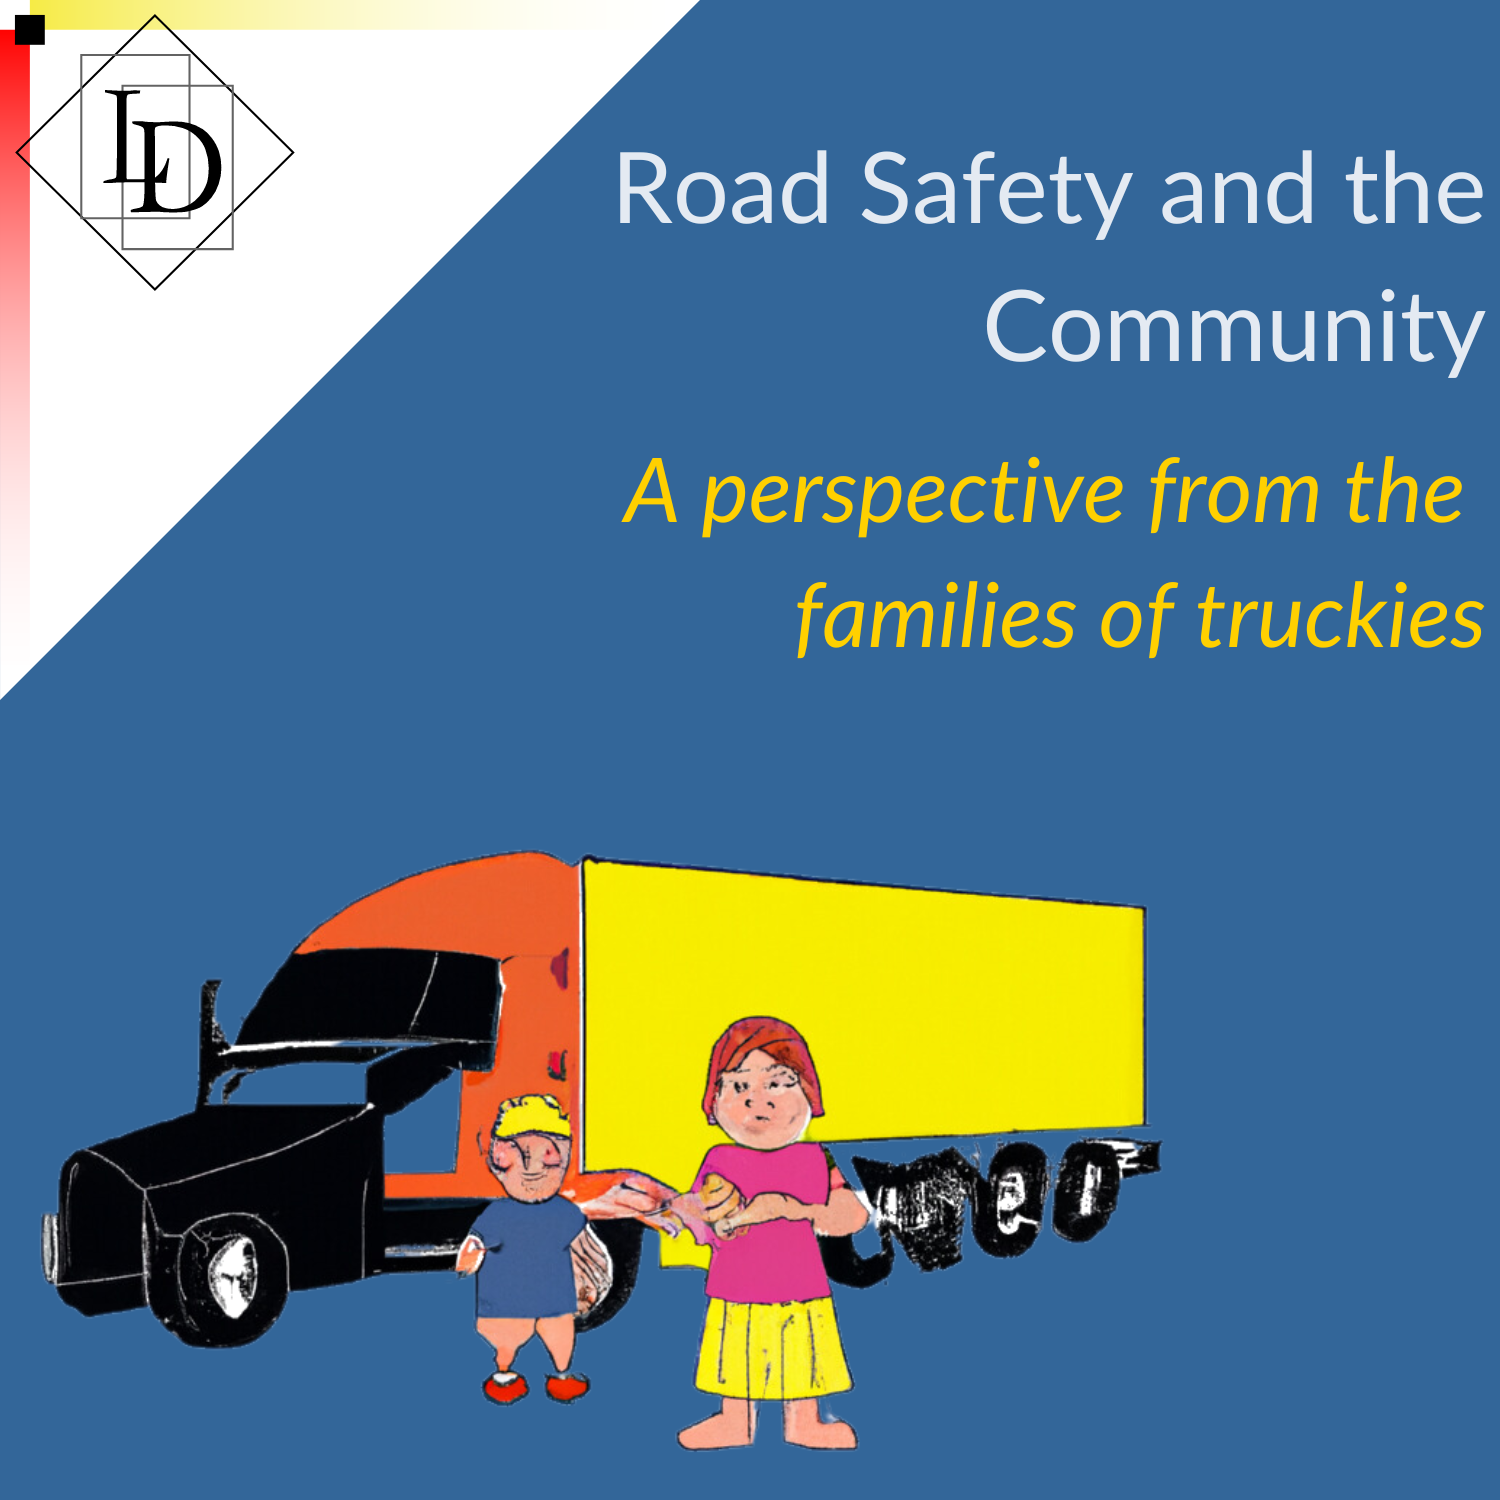 Text Road Safety and the Community.  Child's drawing of a truck with the driver and their spouse standing in front of it.